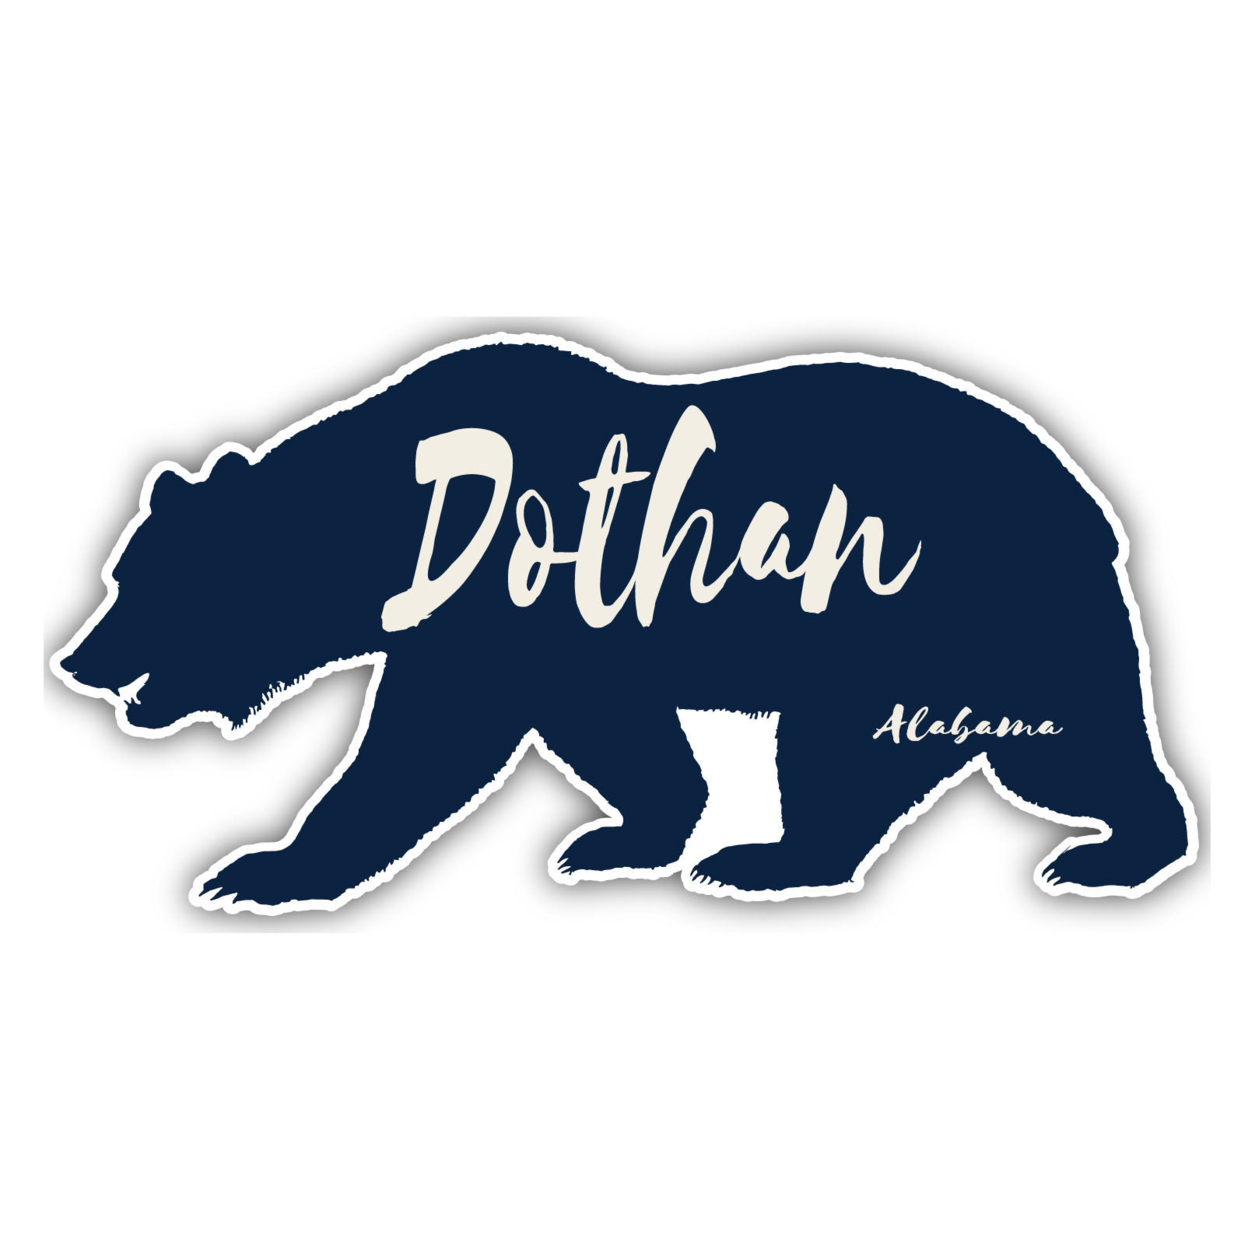 Dothan Alabama Souvenir Decorative Stickers (Choose Theme And Size) - 4-Pack, 6-Inch, Camp Life